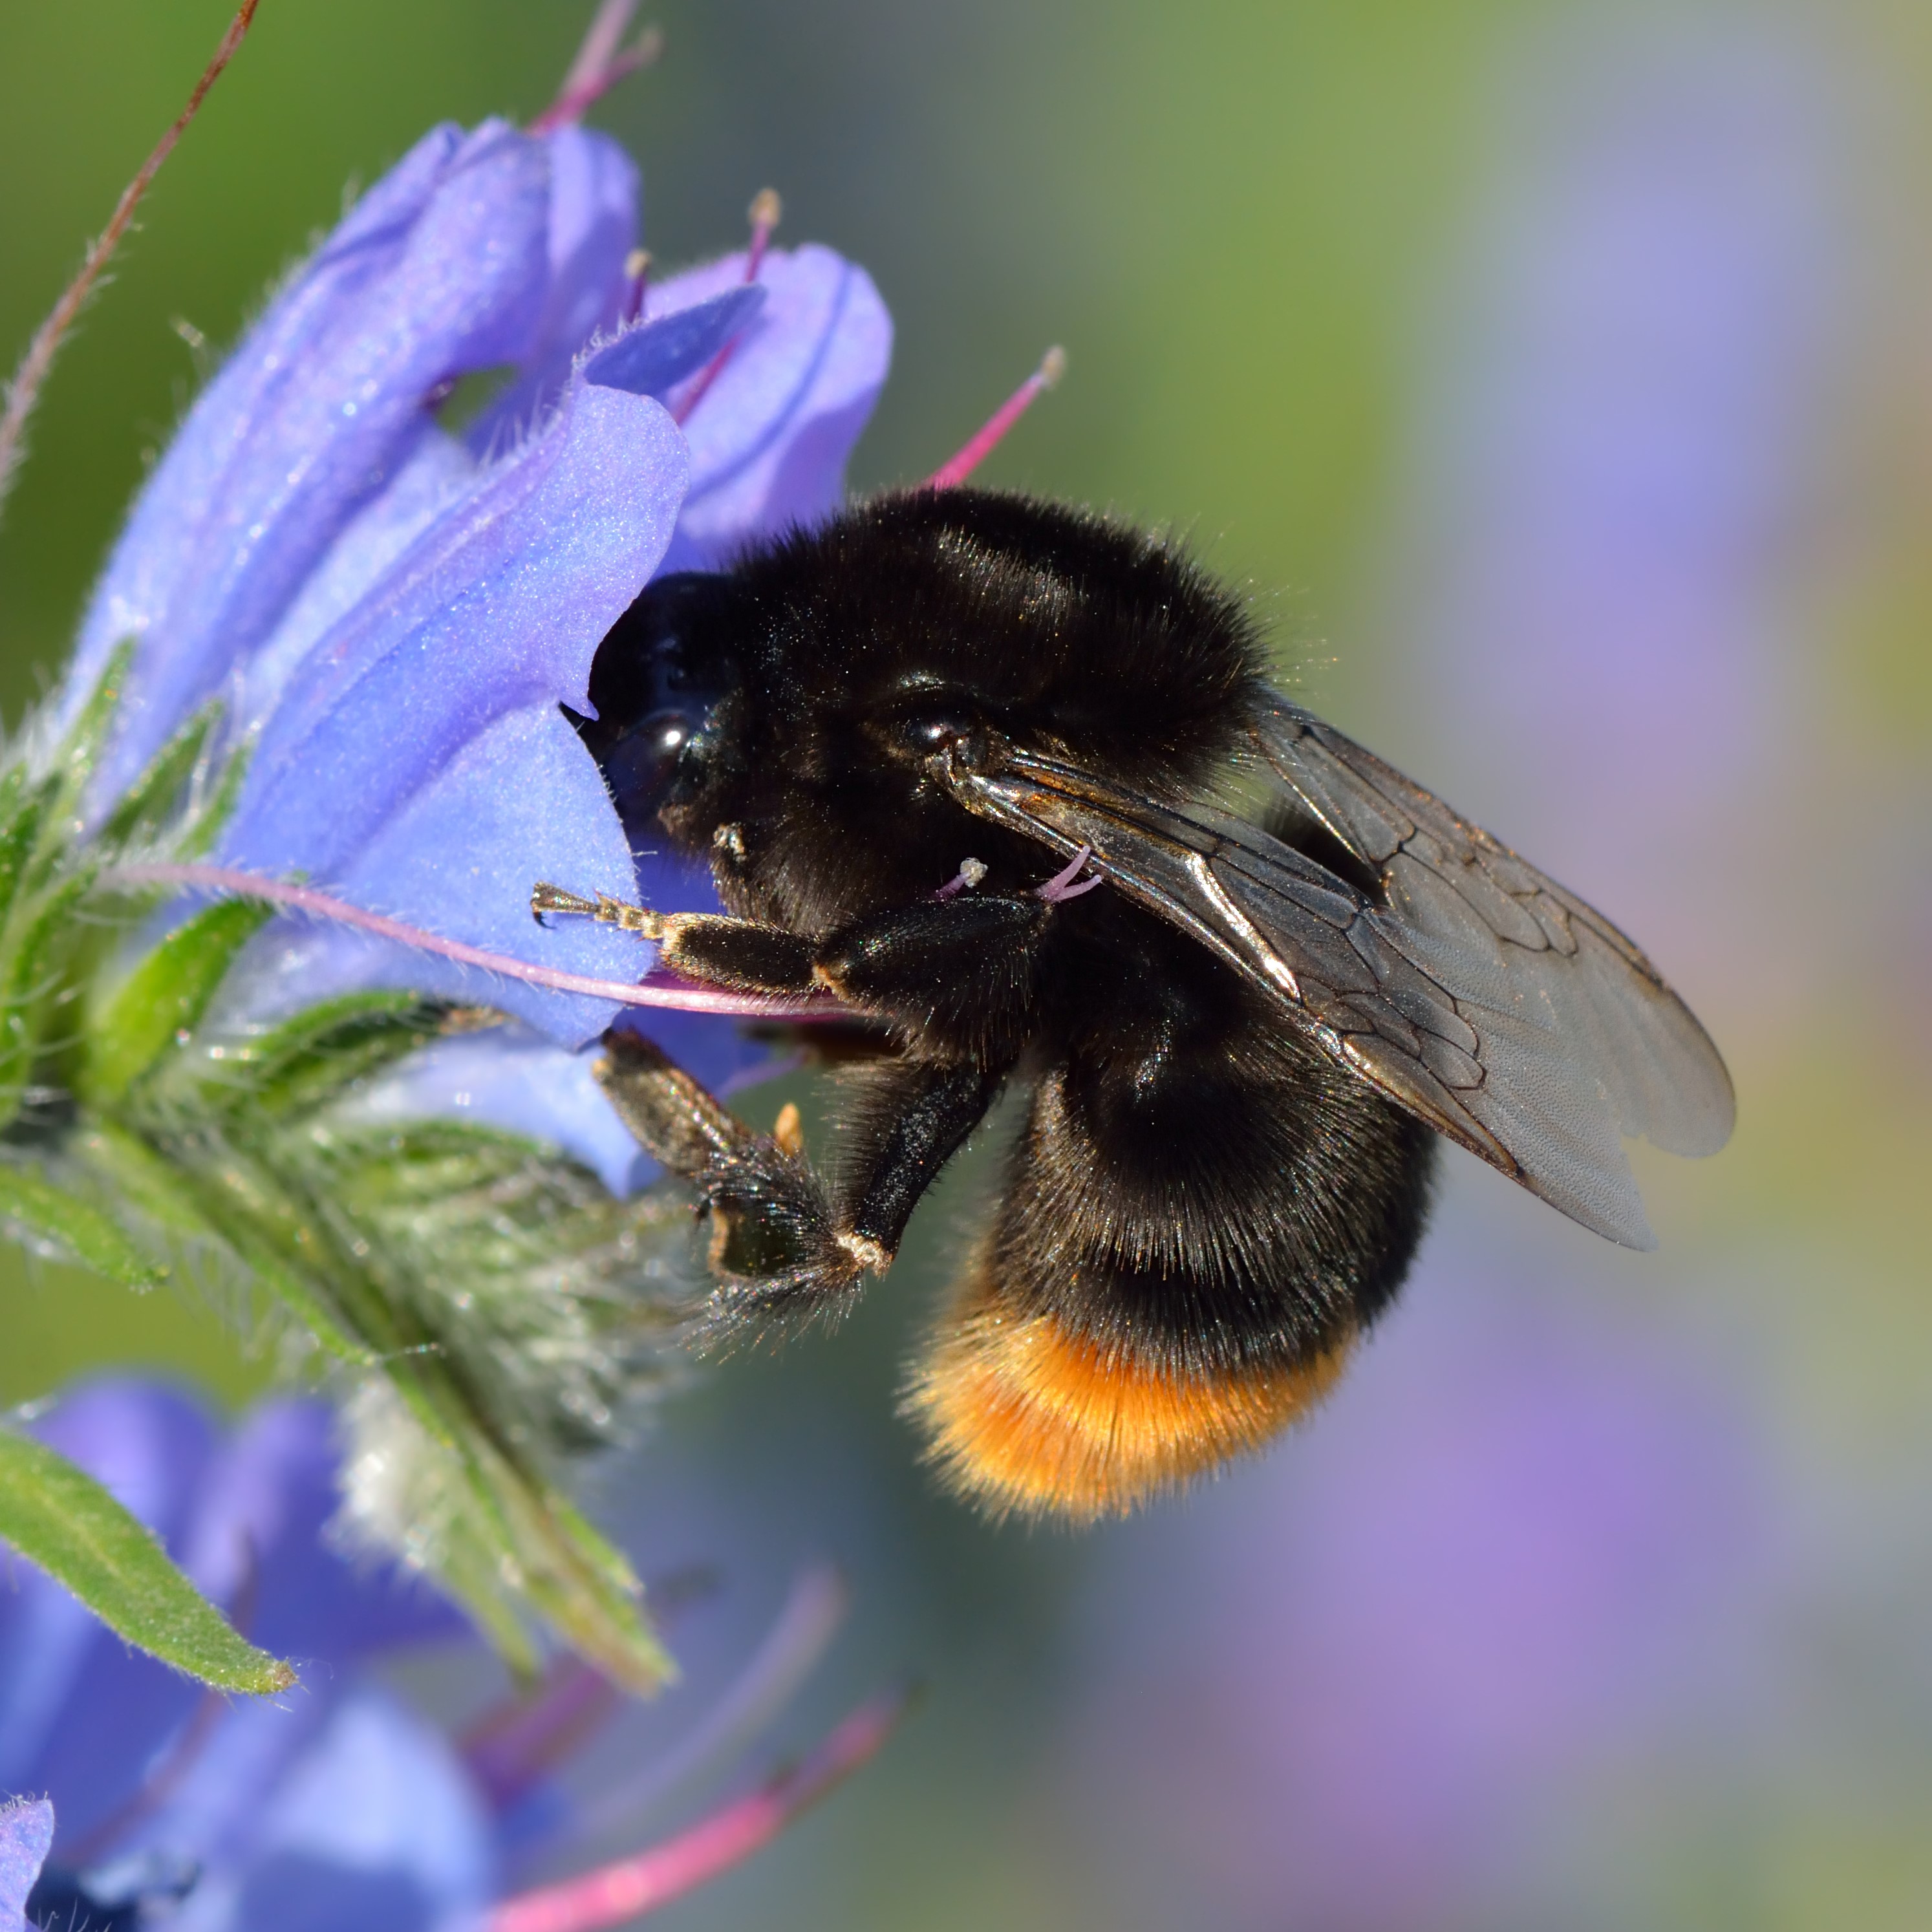 How are insects doing these days? Bumblebee genes provide the answer.